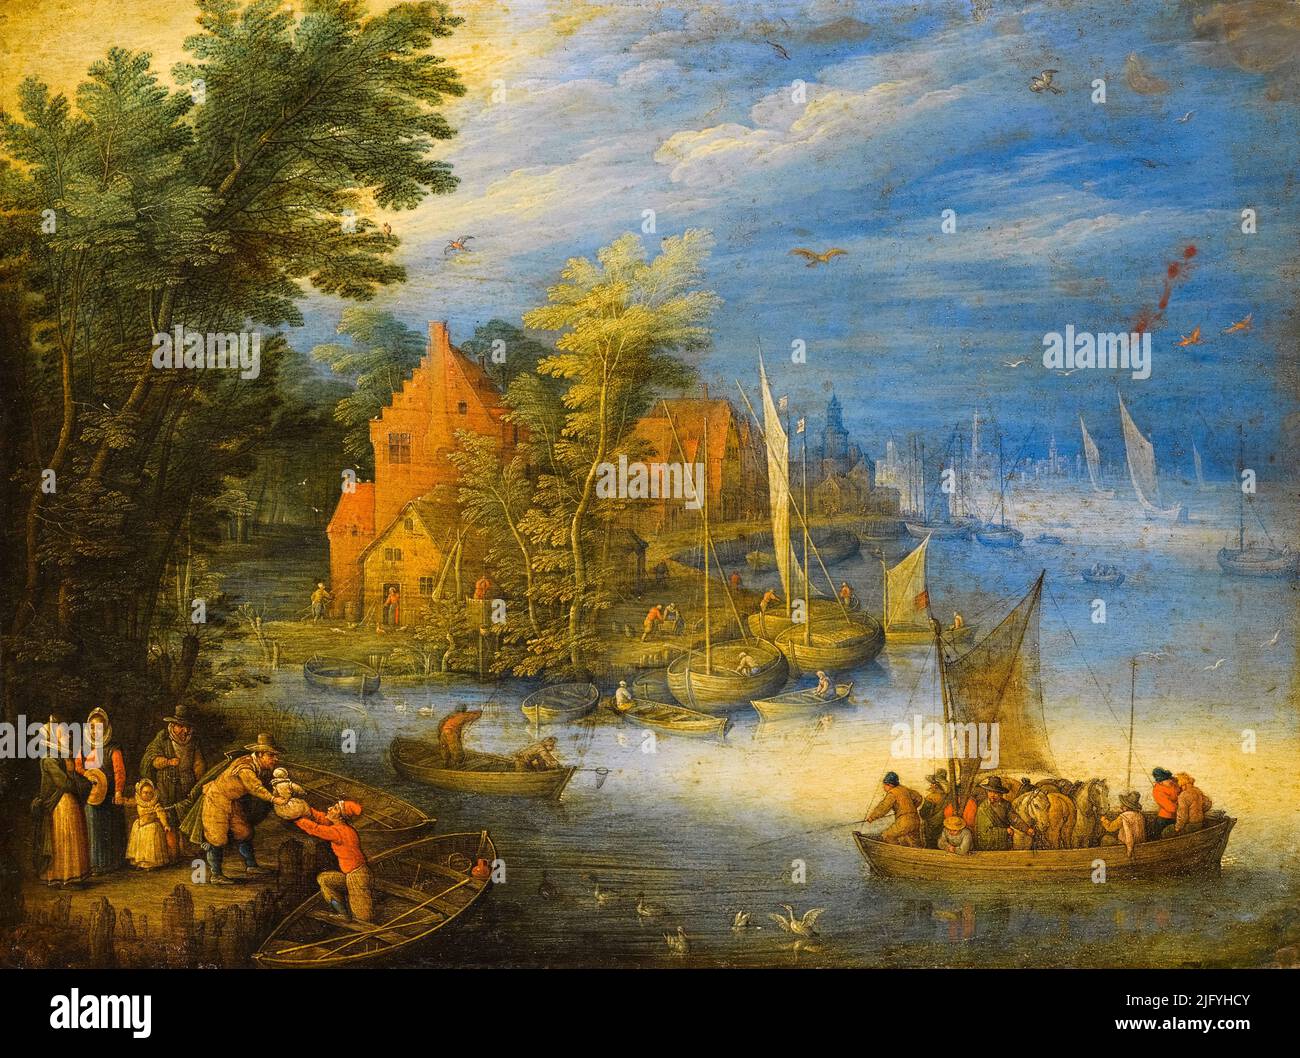 Jan Breughel the Younger, A Town On The Banks Of A Wide River, With A, Heavily Laden Ferry, Approaching The Shore, In The Forgeound, painting in oil on copper, before 1678 Stock Photo